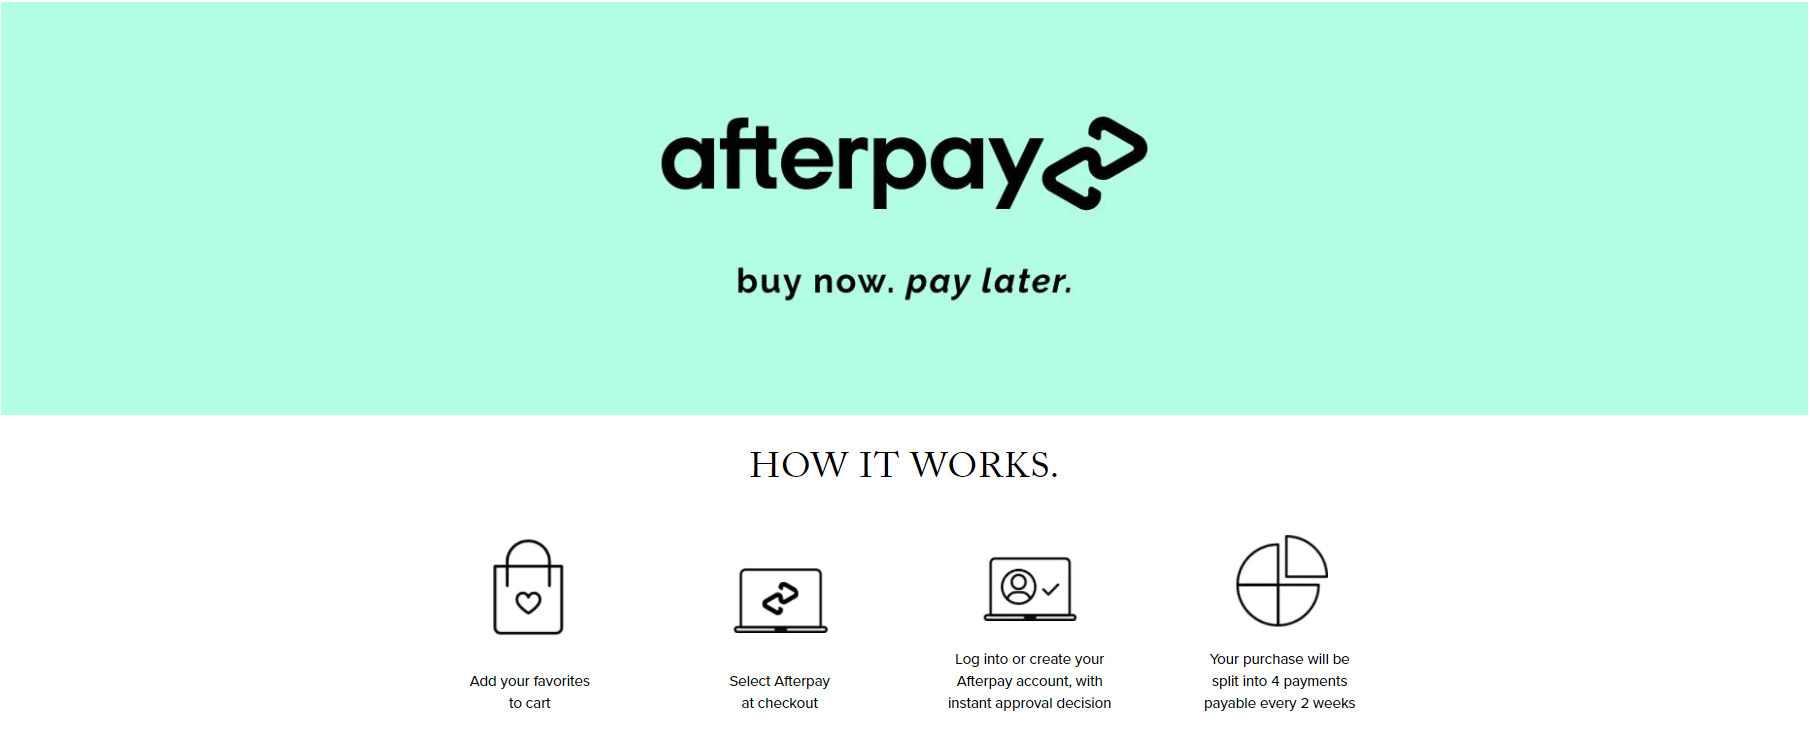 afterpay-banner